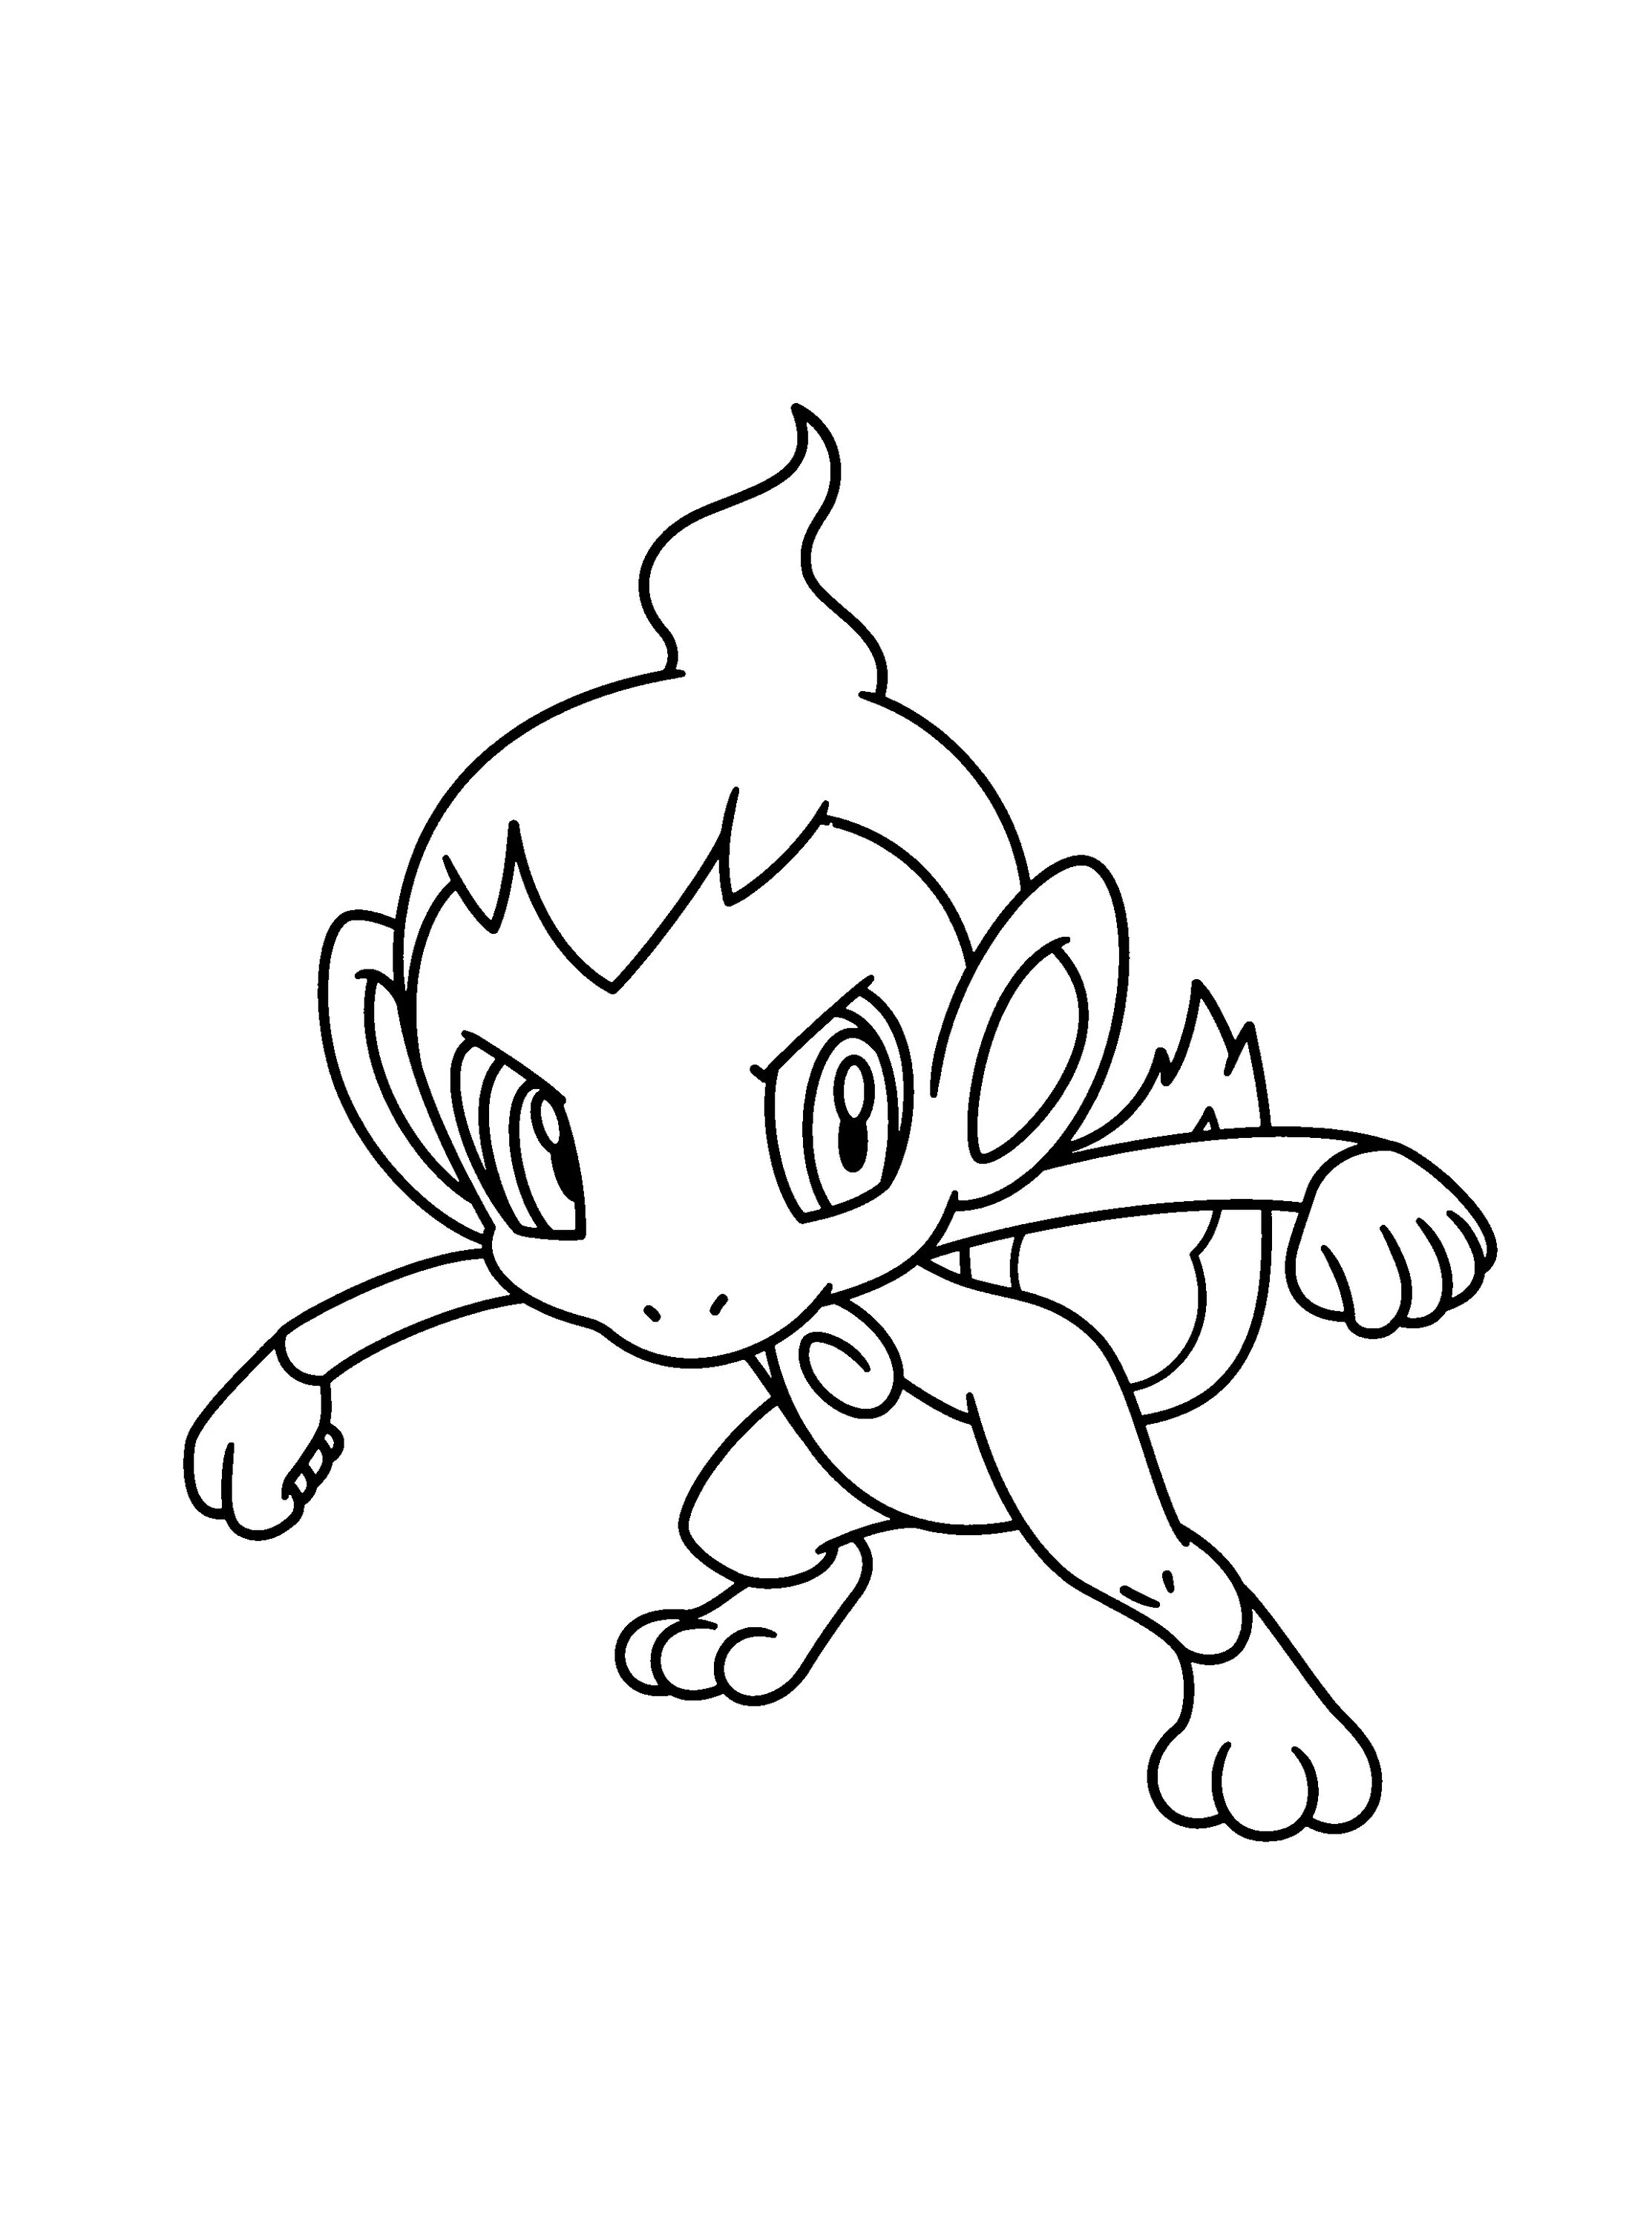 Coloring shiny chimchar